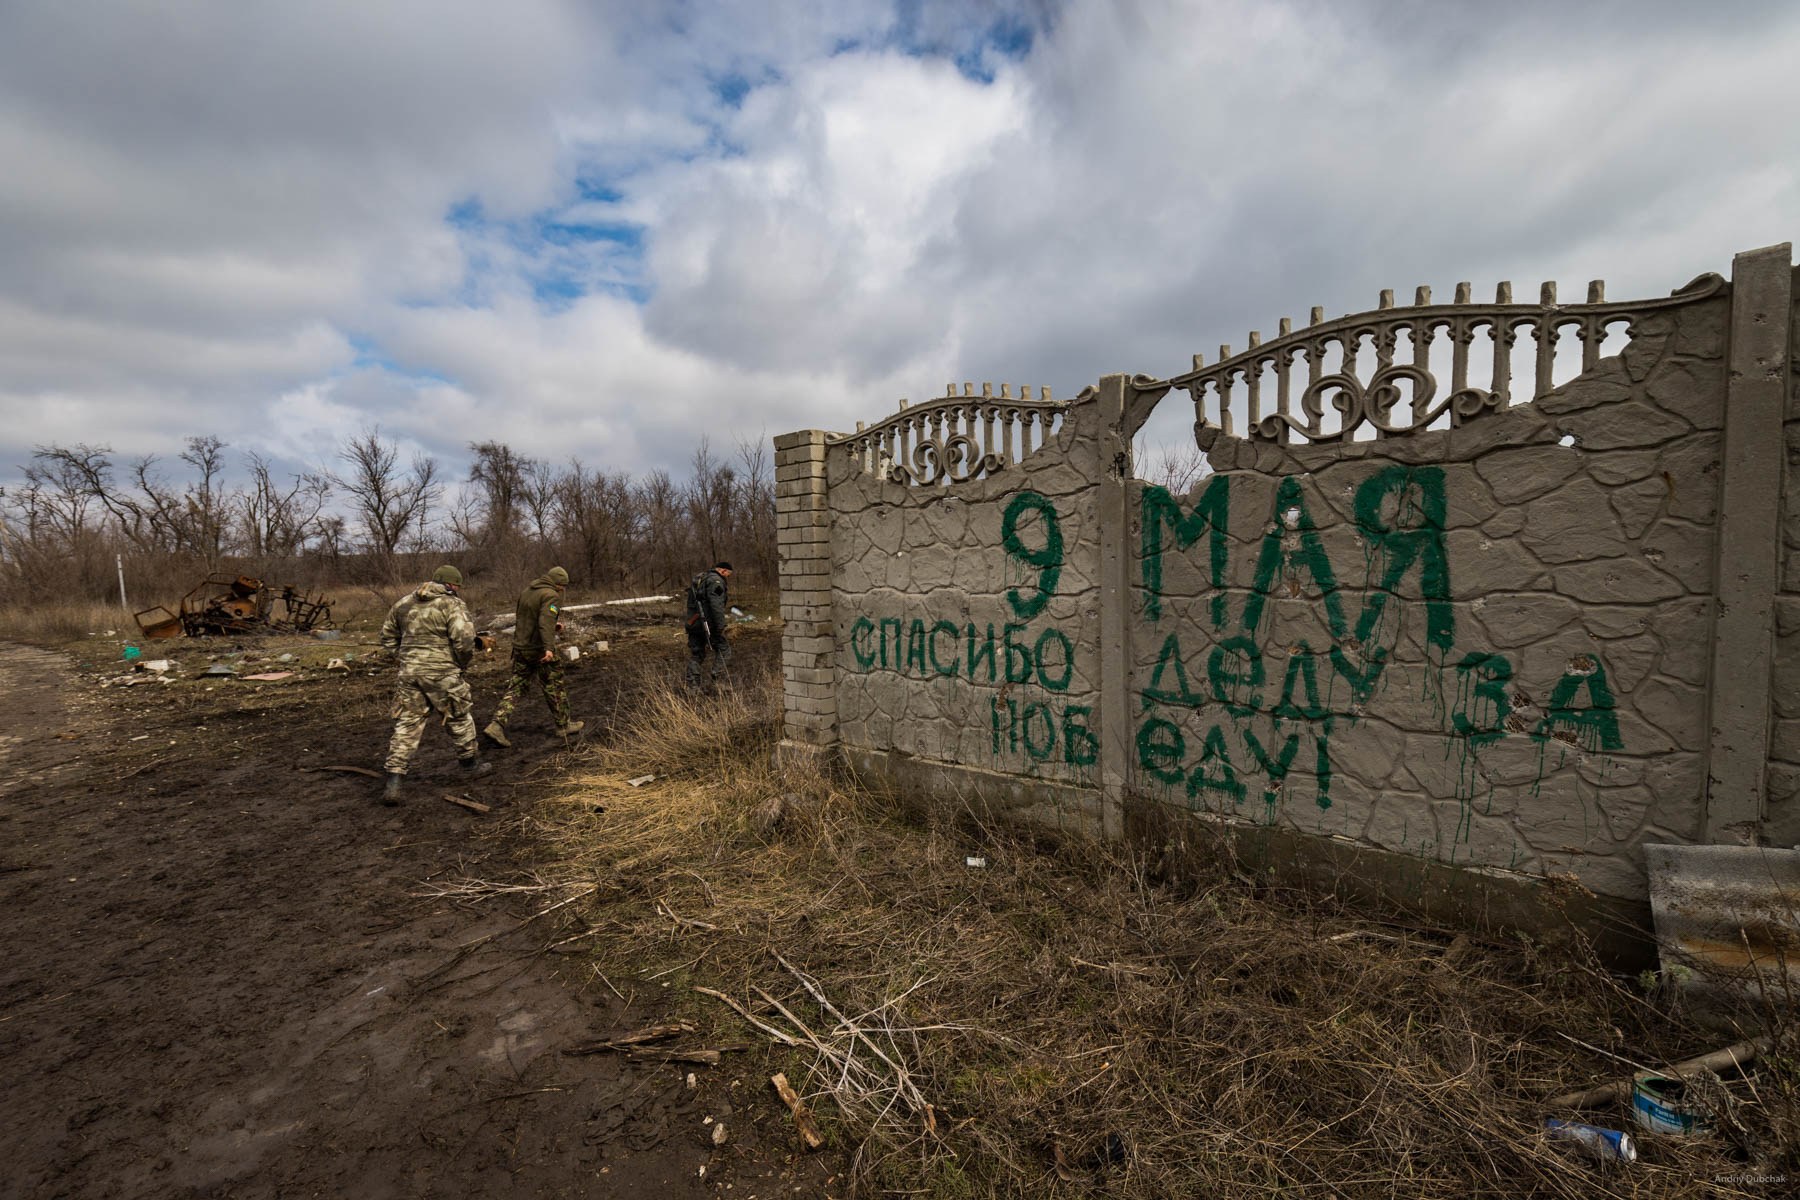 "May 9th, thank your grandfather for the victory!" - an inscription made by pro-Russian militants in Shirokine, before Ukrainian marines drove them out from the village in 2016. Currently, the whole of Shirokine is under control of the Ukrainian Army. Enemy positions are several hundred meters away from the village. Shirokine, March 2018.